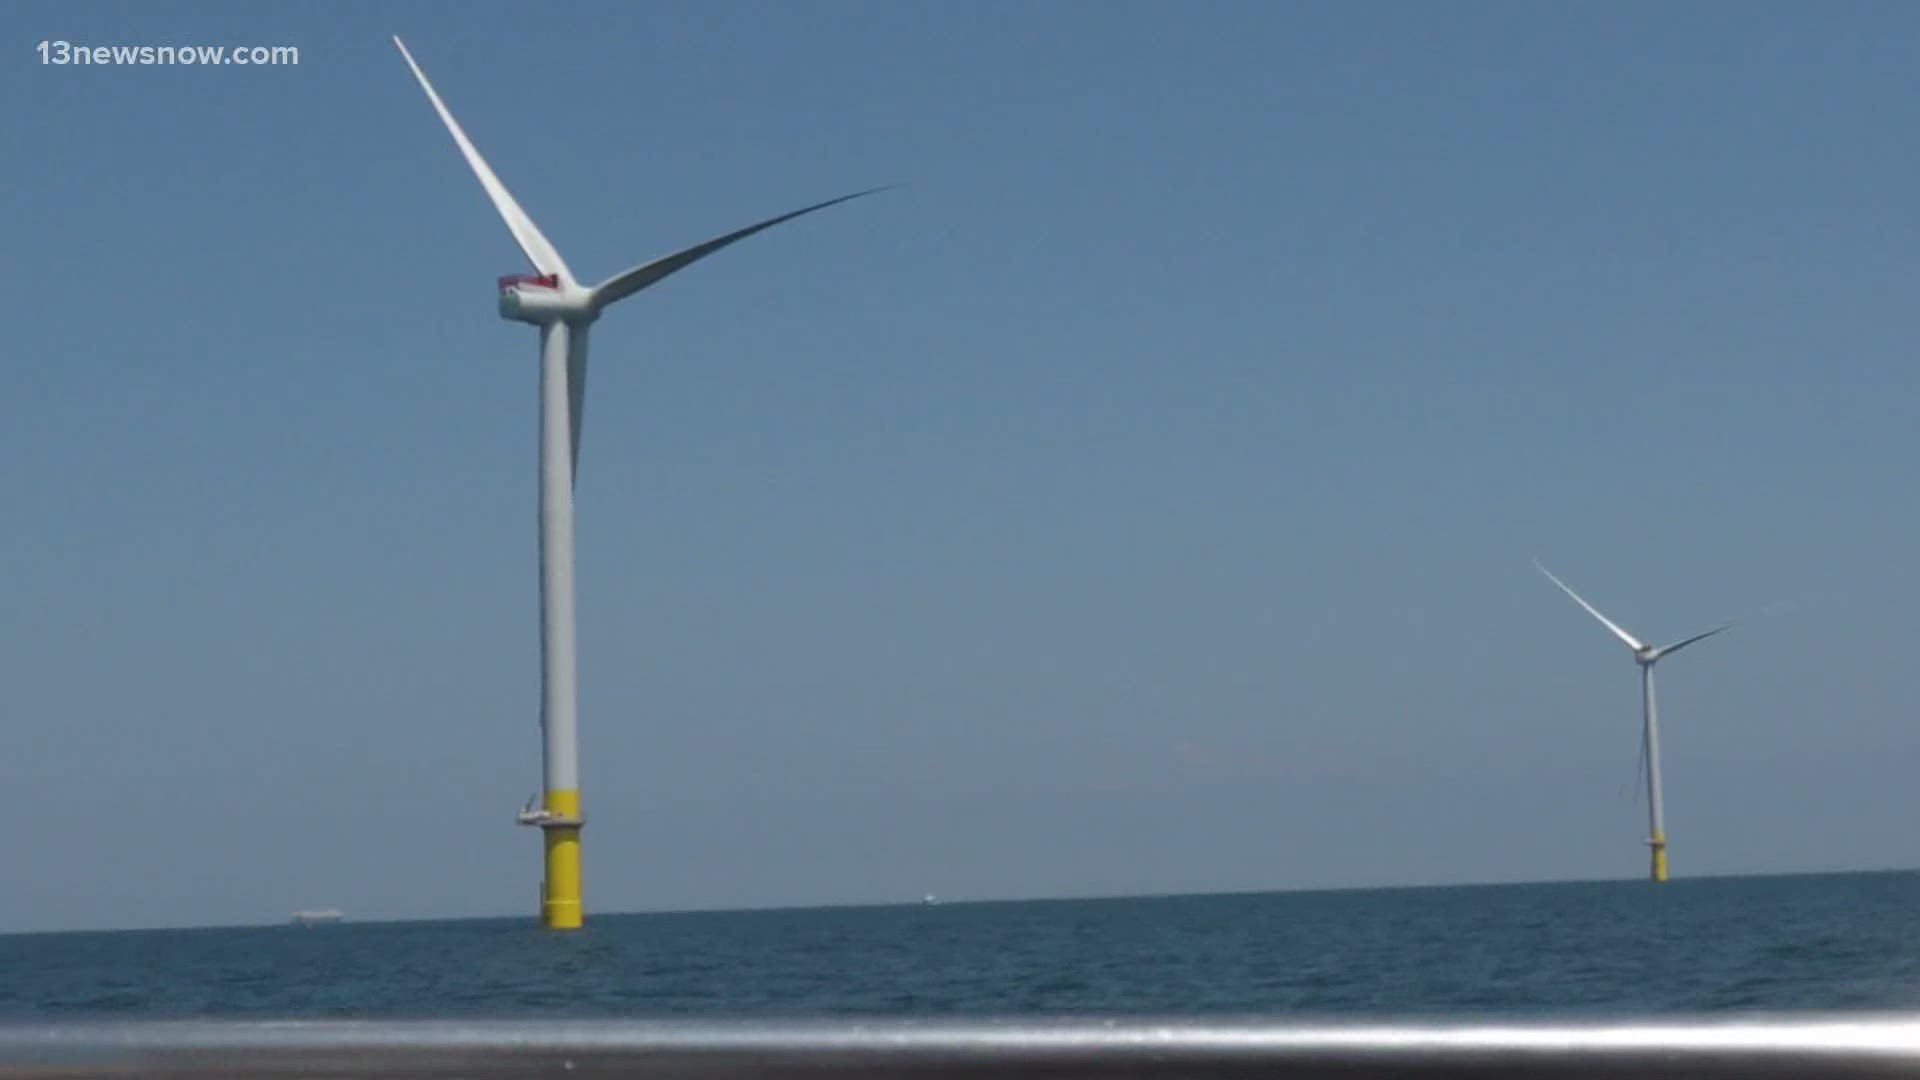 Dominion Energy finished construction of the first offshore wind project in federal water.